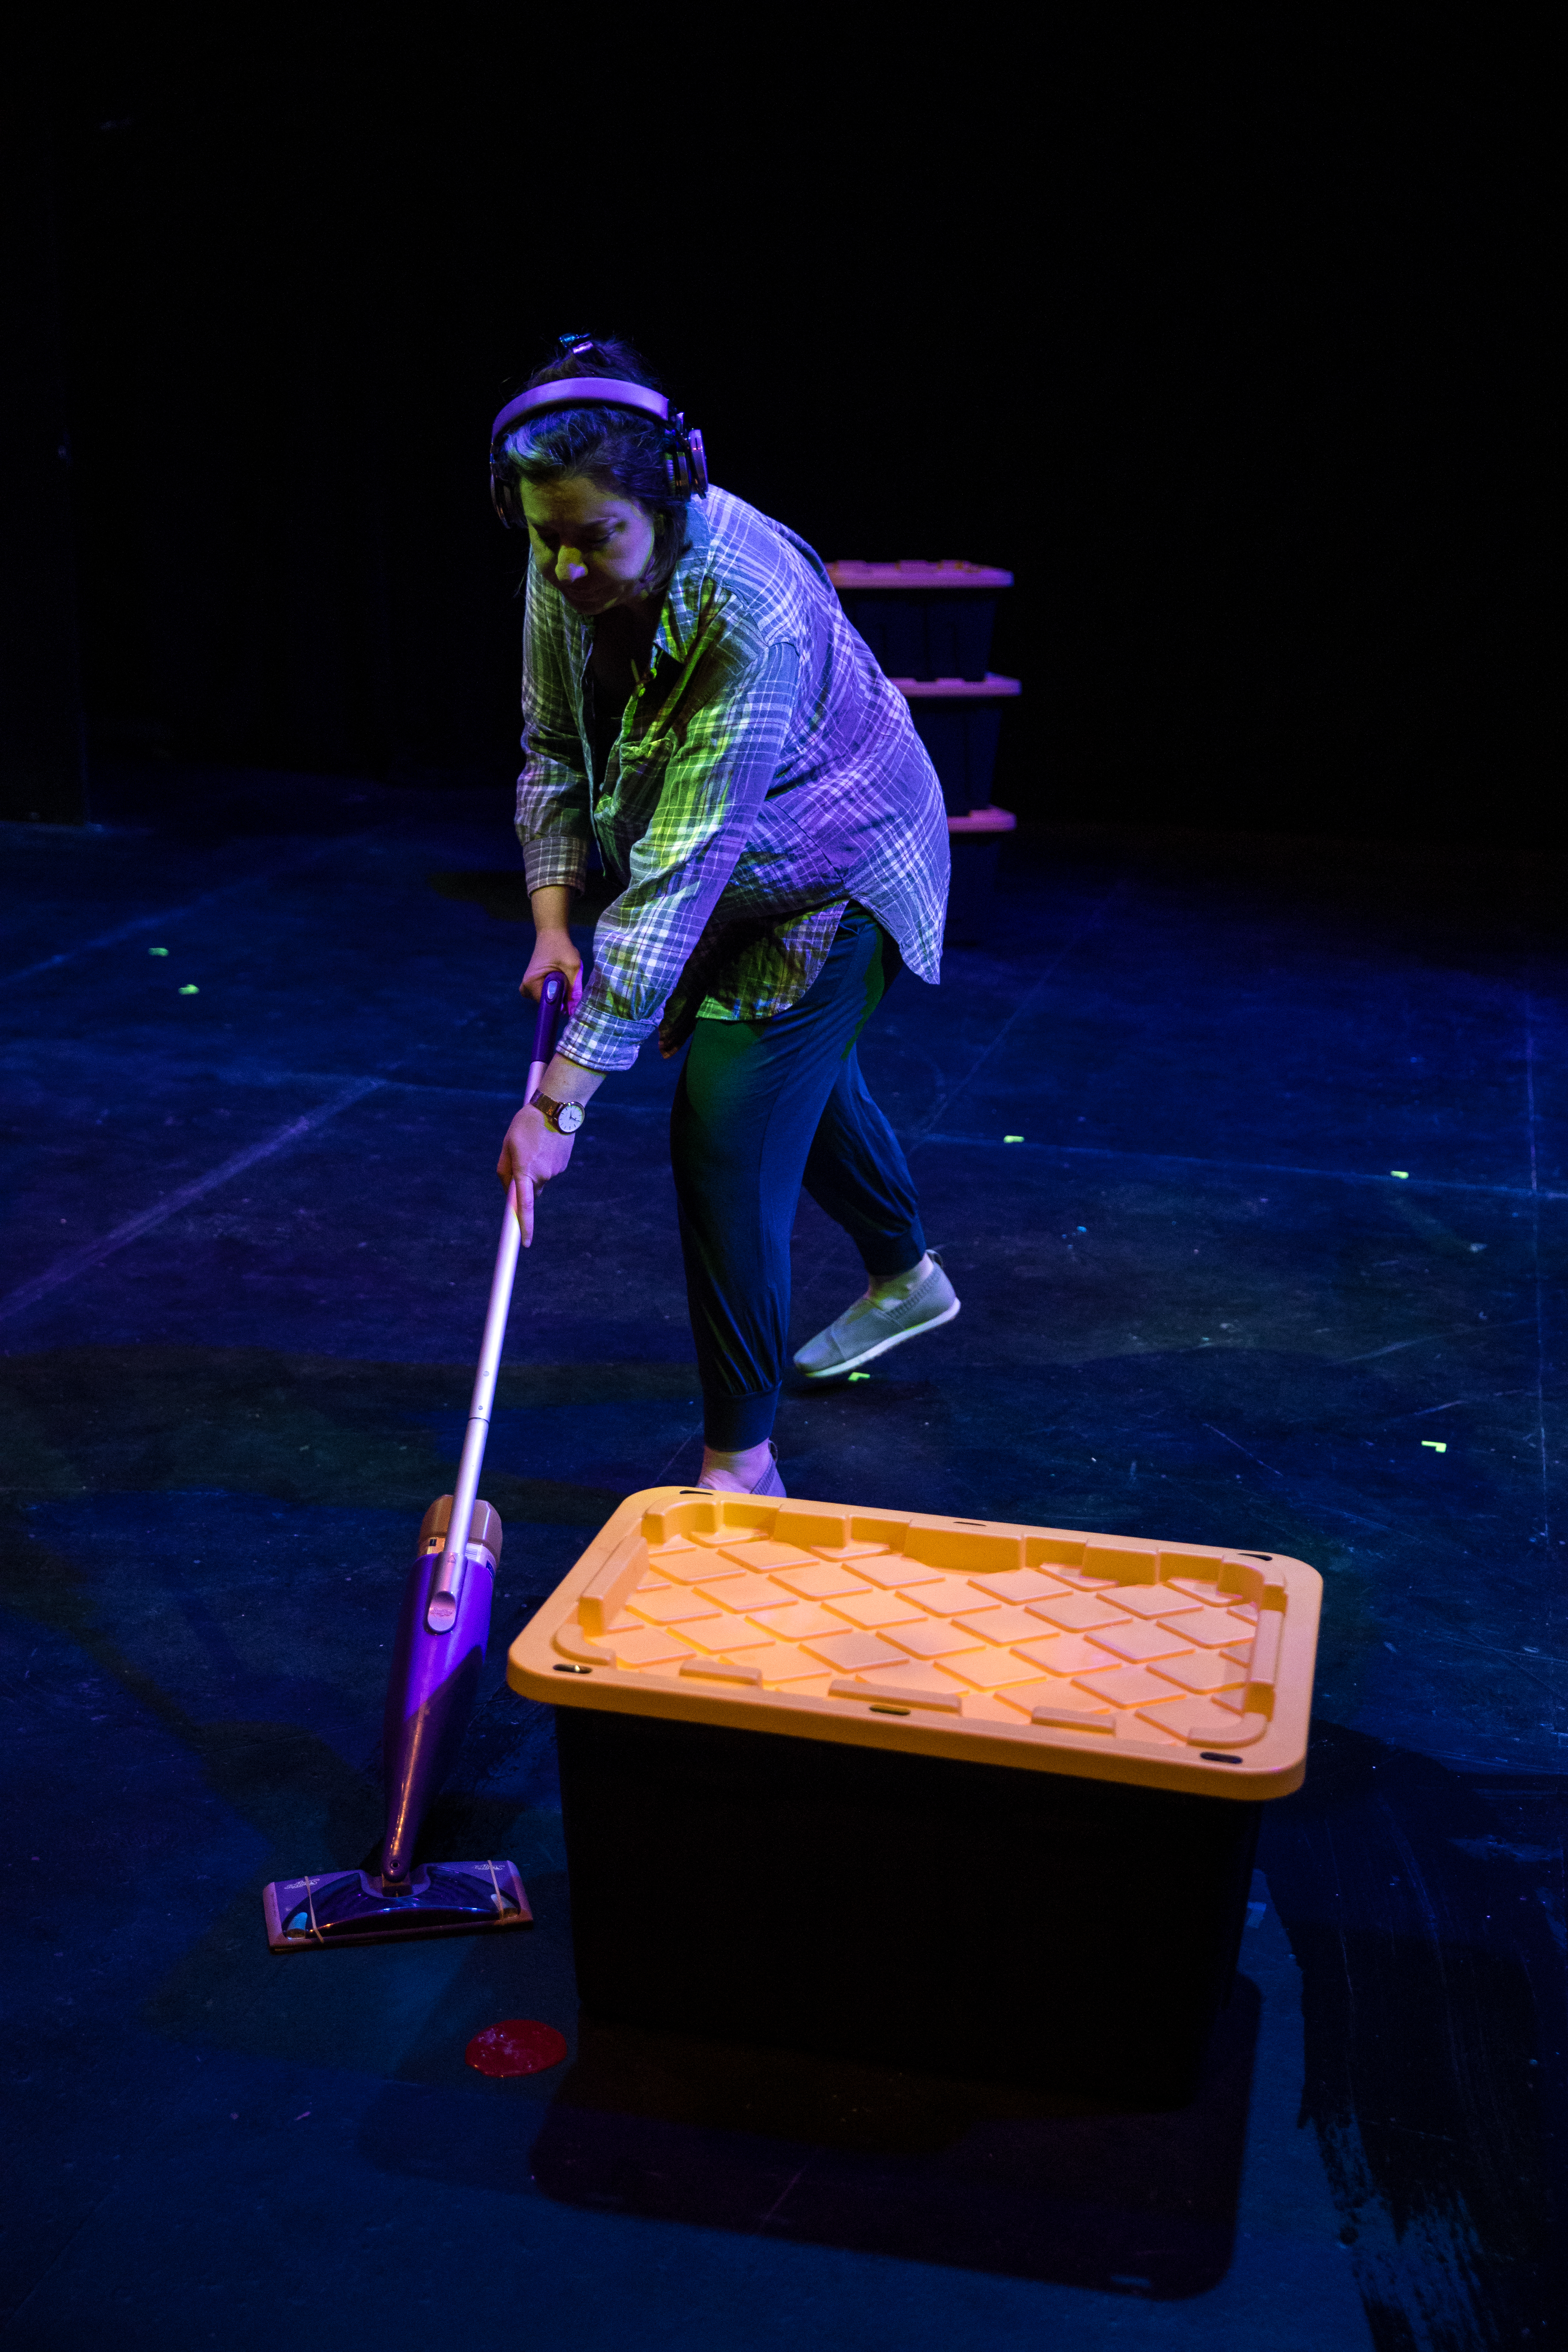 An actor onstage mops up a spot of blood by a bin